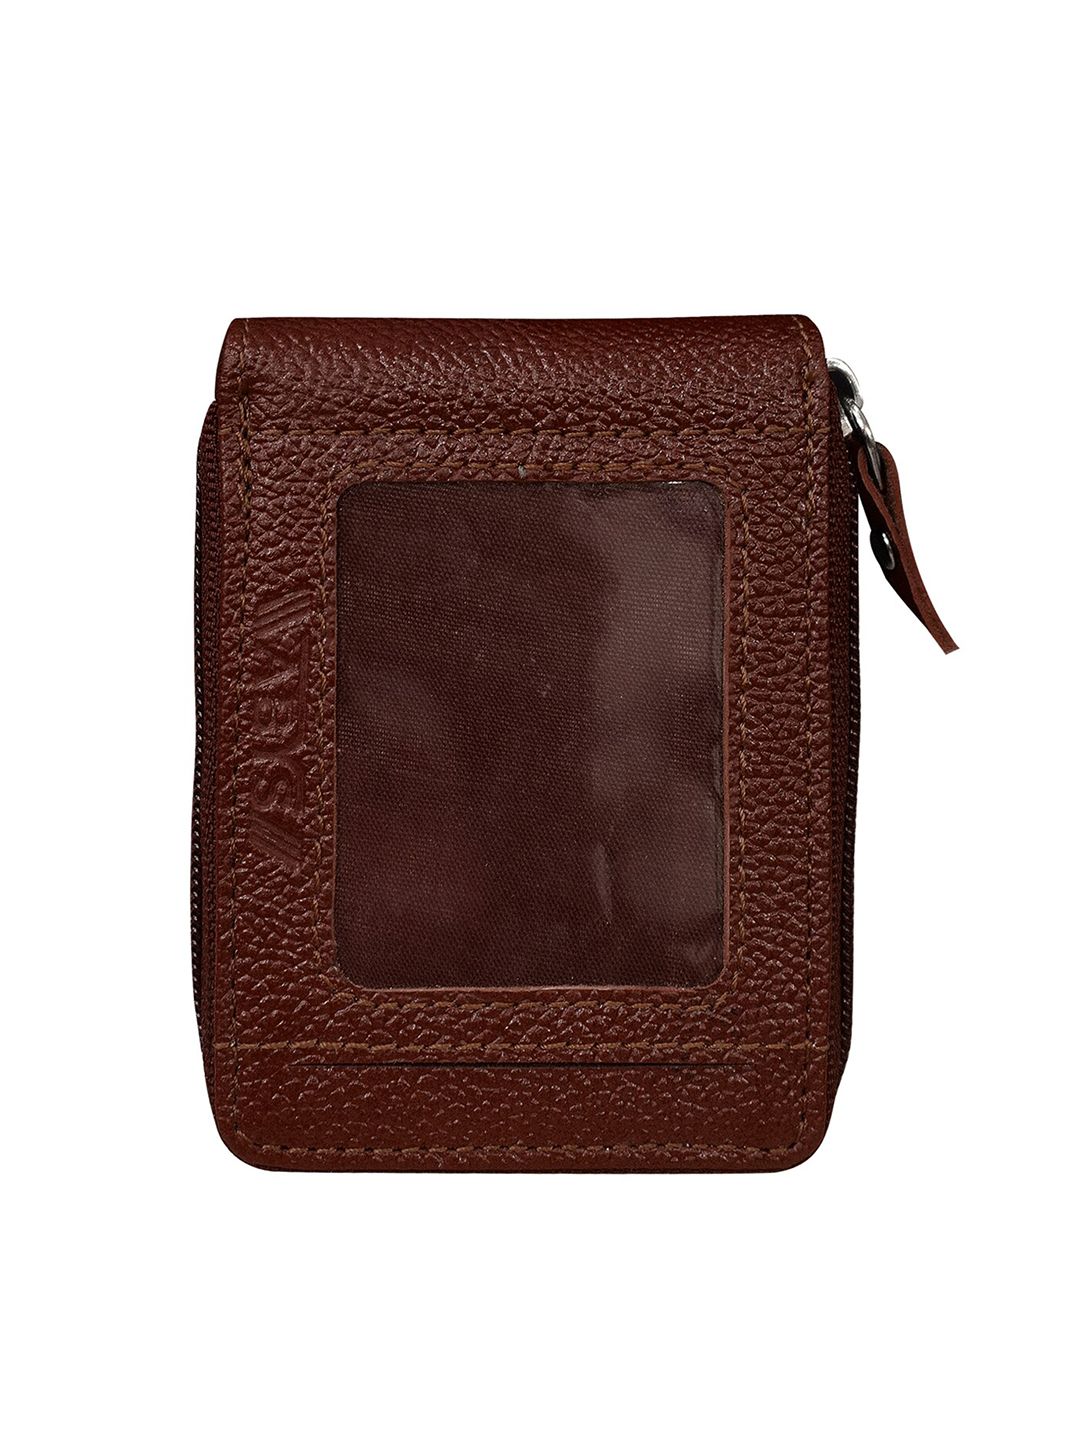 ABYS Unisex Brown Textured Leather Zip Around Wallet Price in India